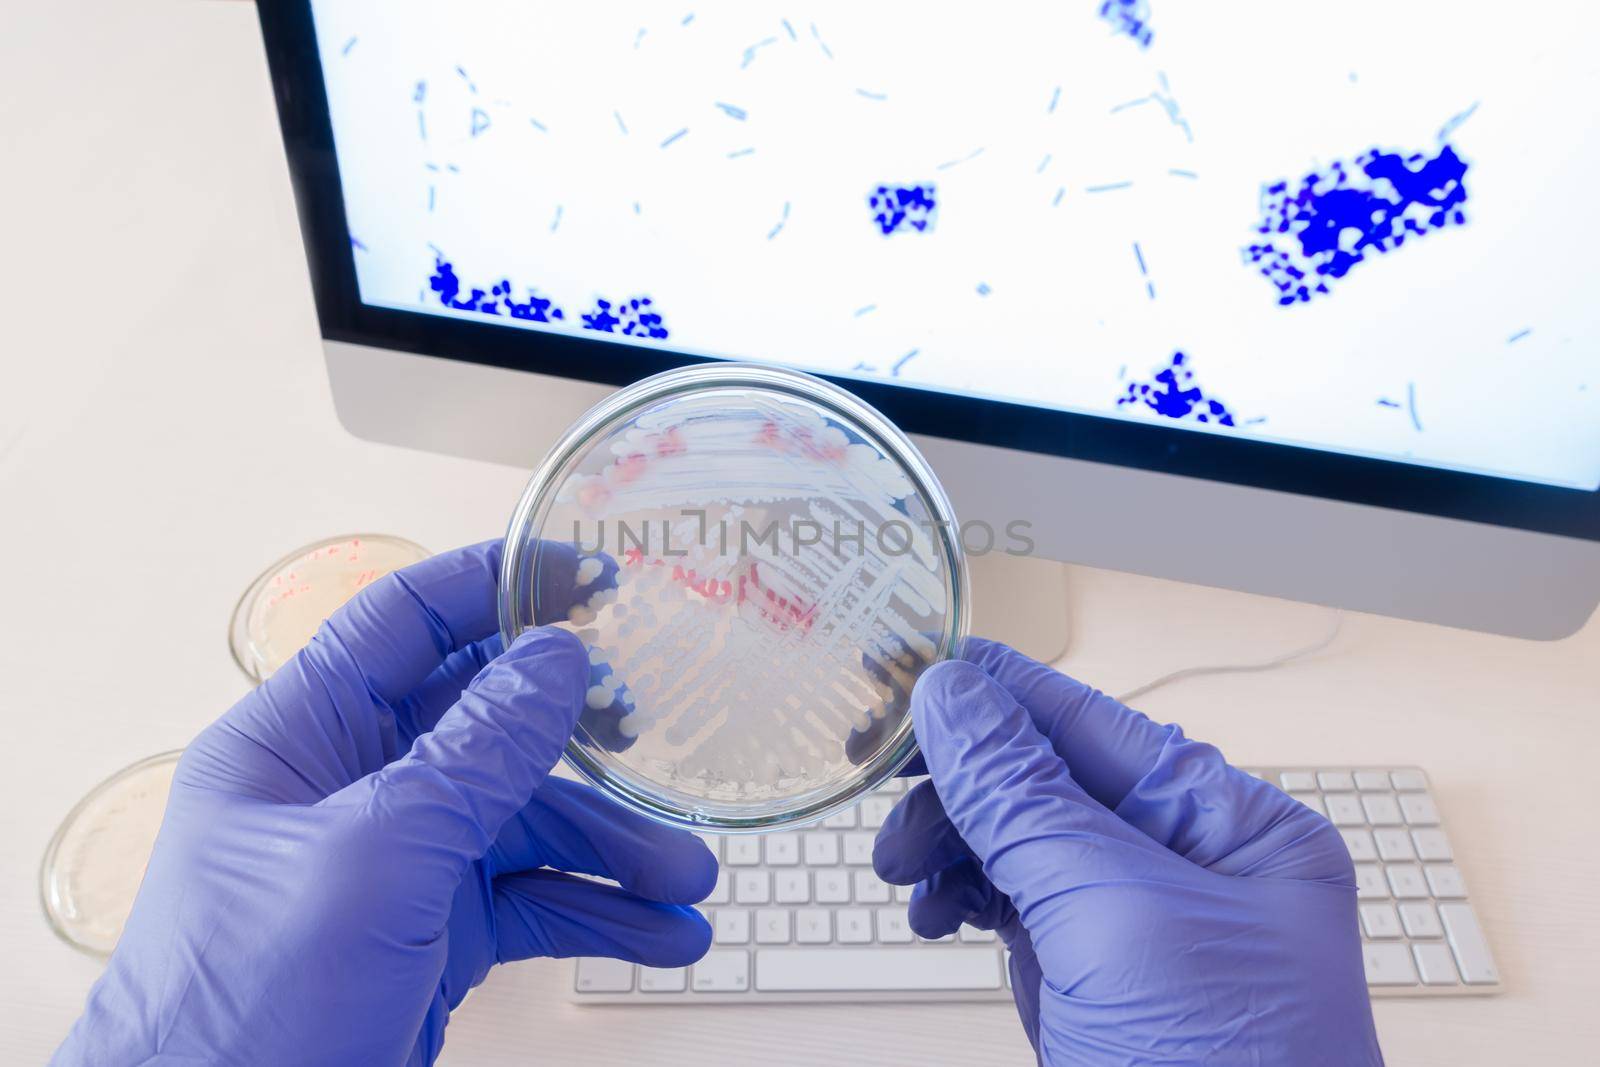 Analysis of bacteria on a Petri dish in front of a monitor with a photo of bacteria.